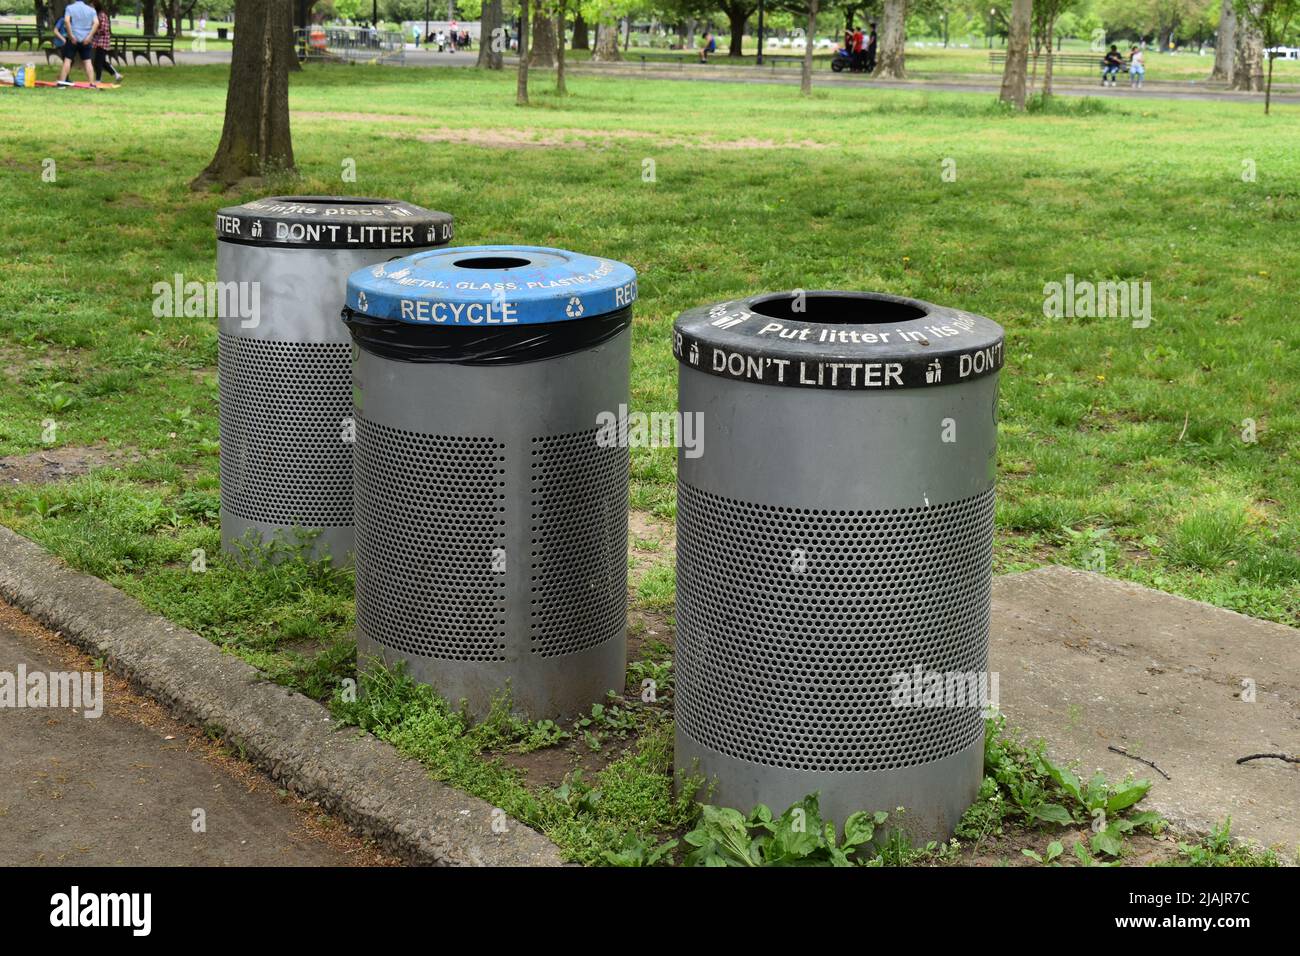 Queens, New York, USA - May 14, 2022 -Metal Garbage and Recycle Bins in the Flushing Meadows Corona Park, Queens, New York. Stock Photo